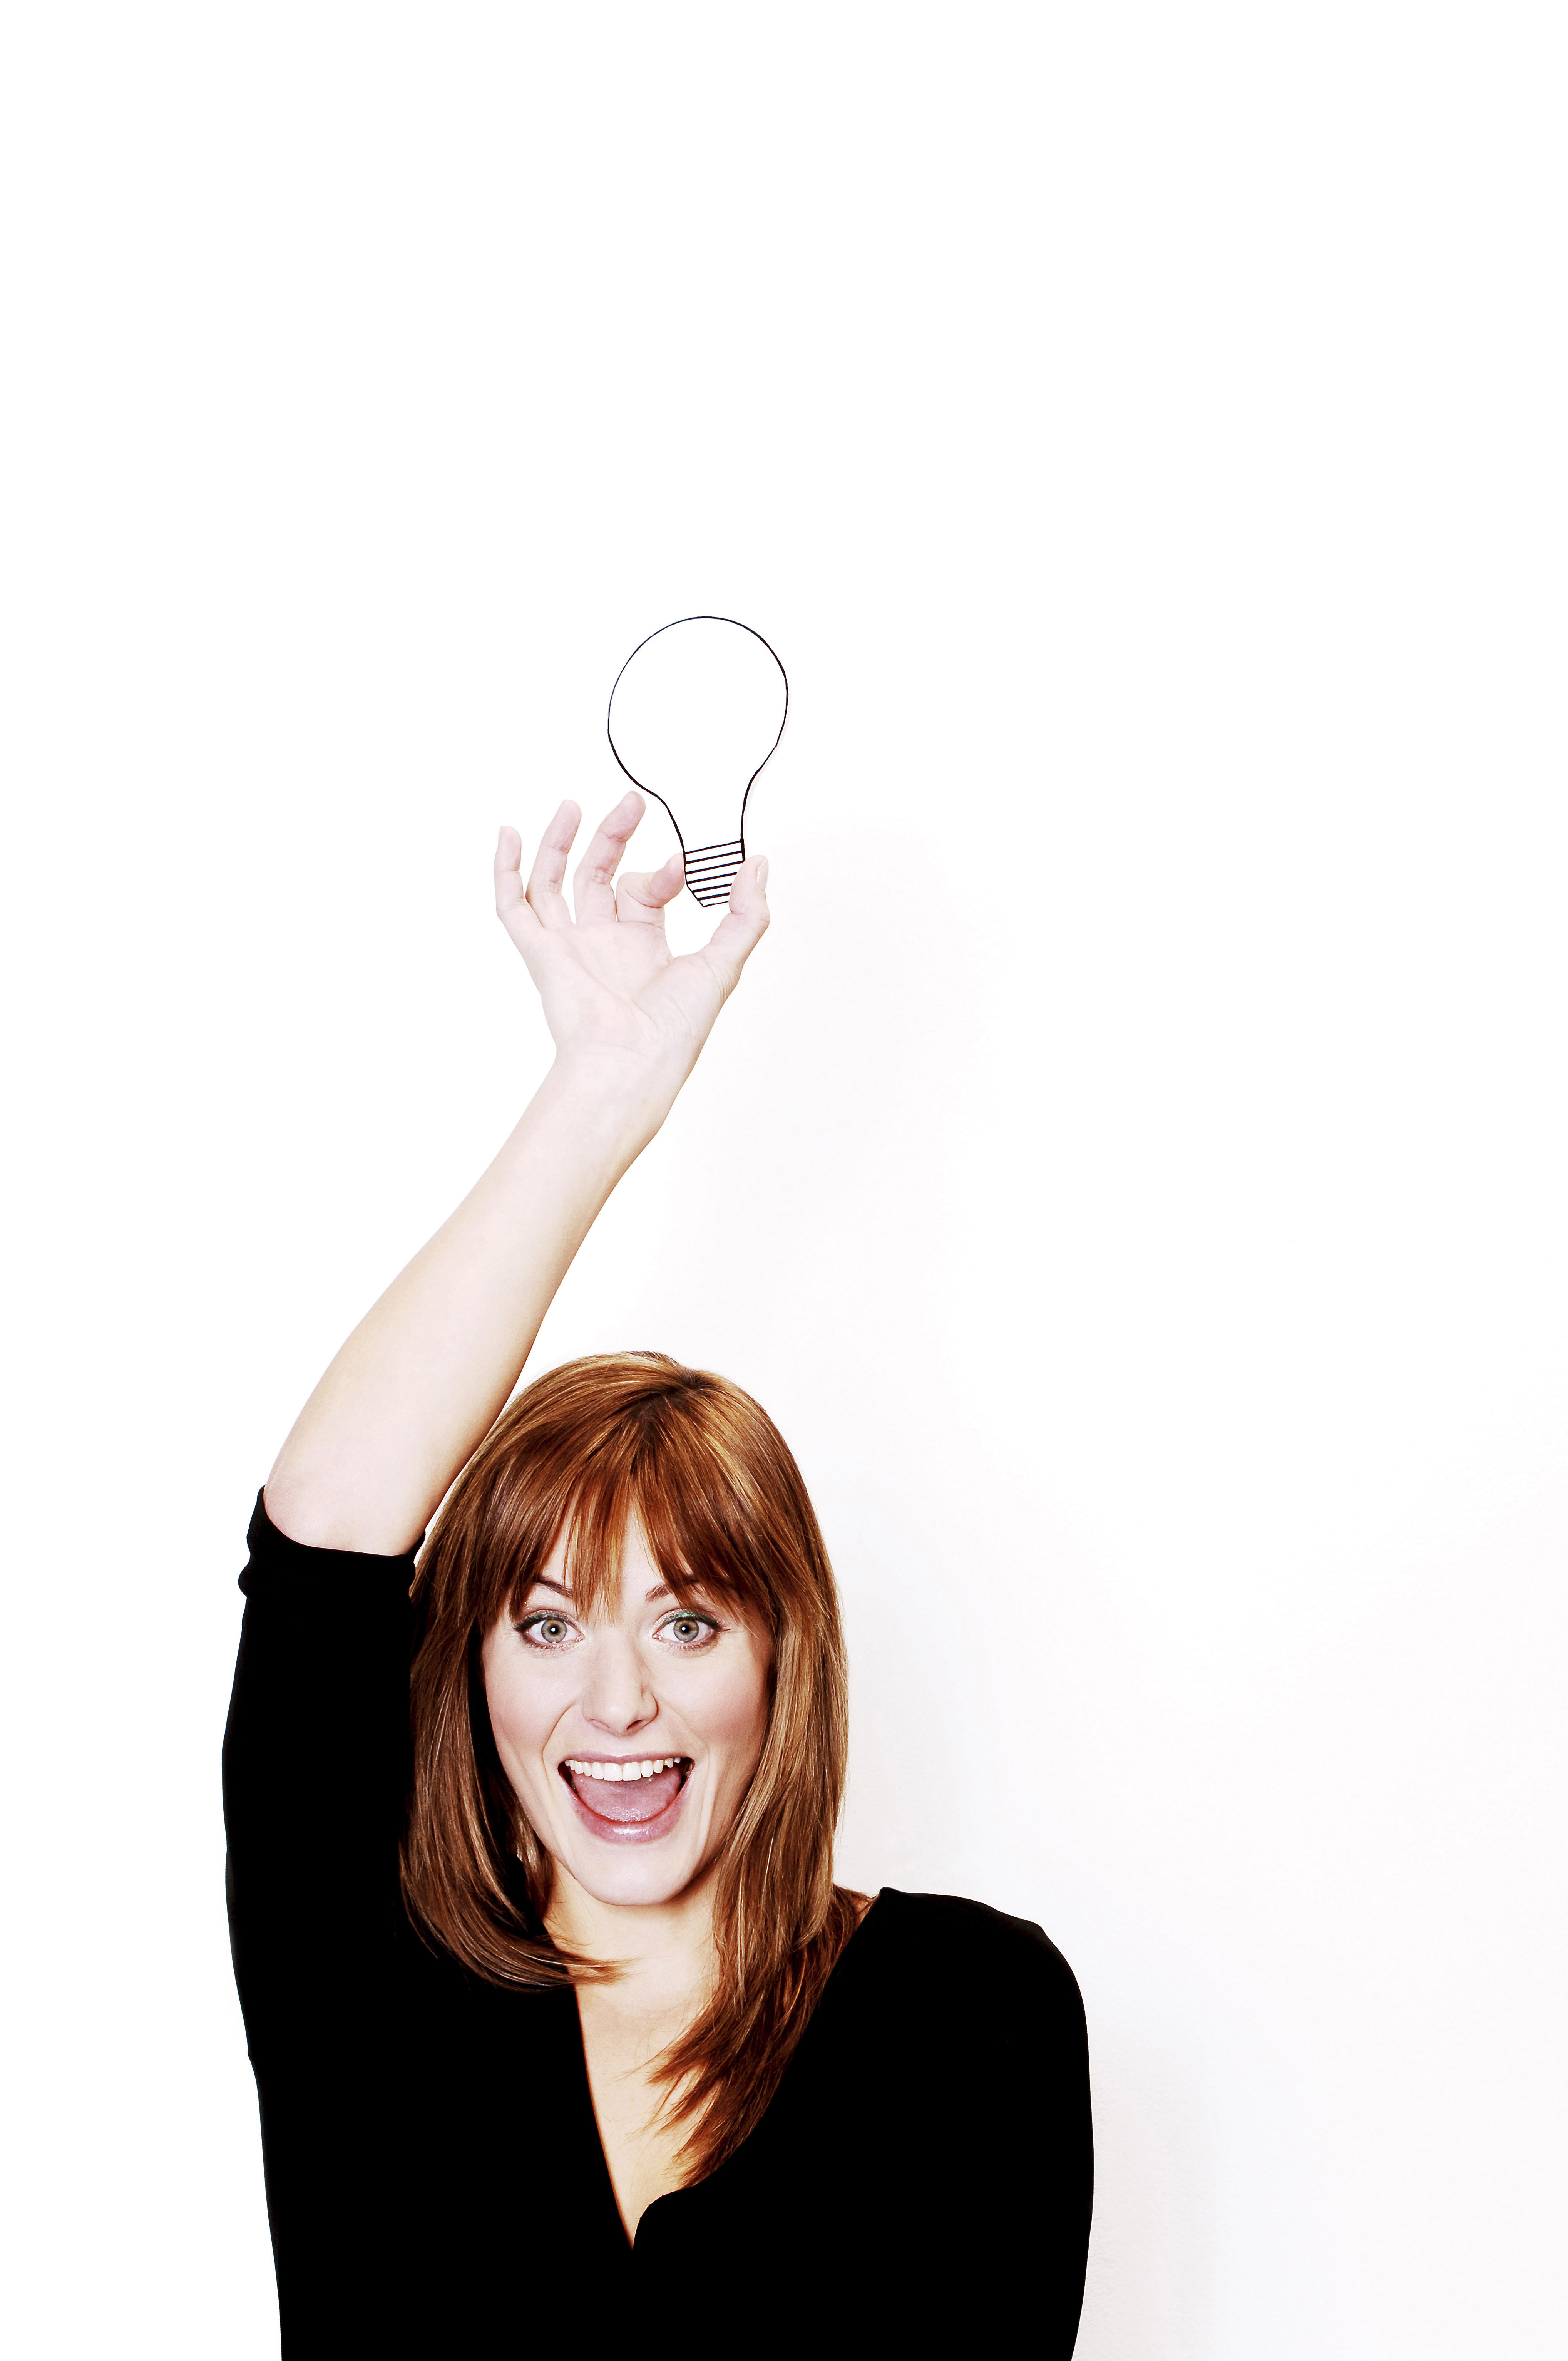 woman holding a bulb picture for smart home lighting article